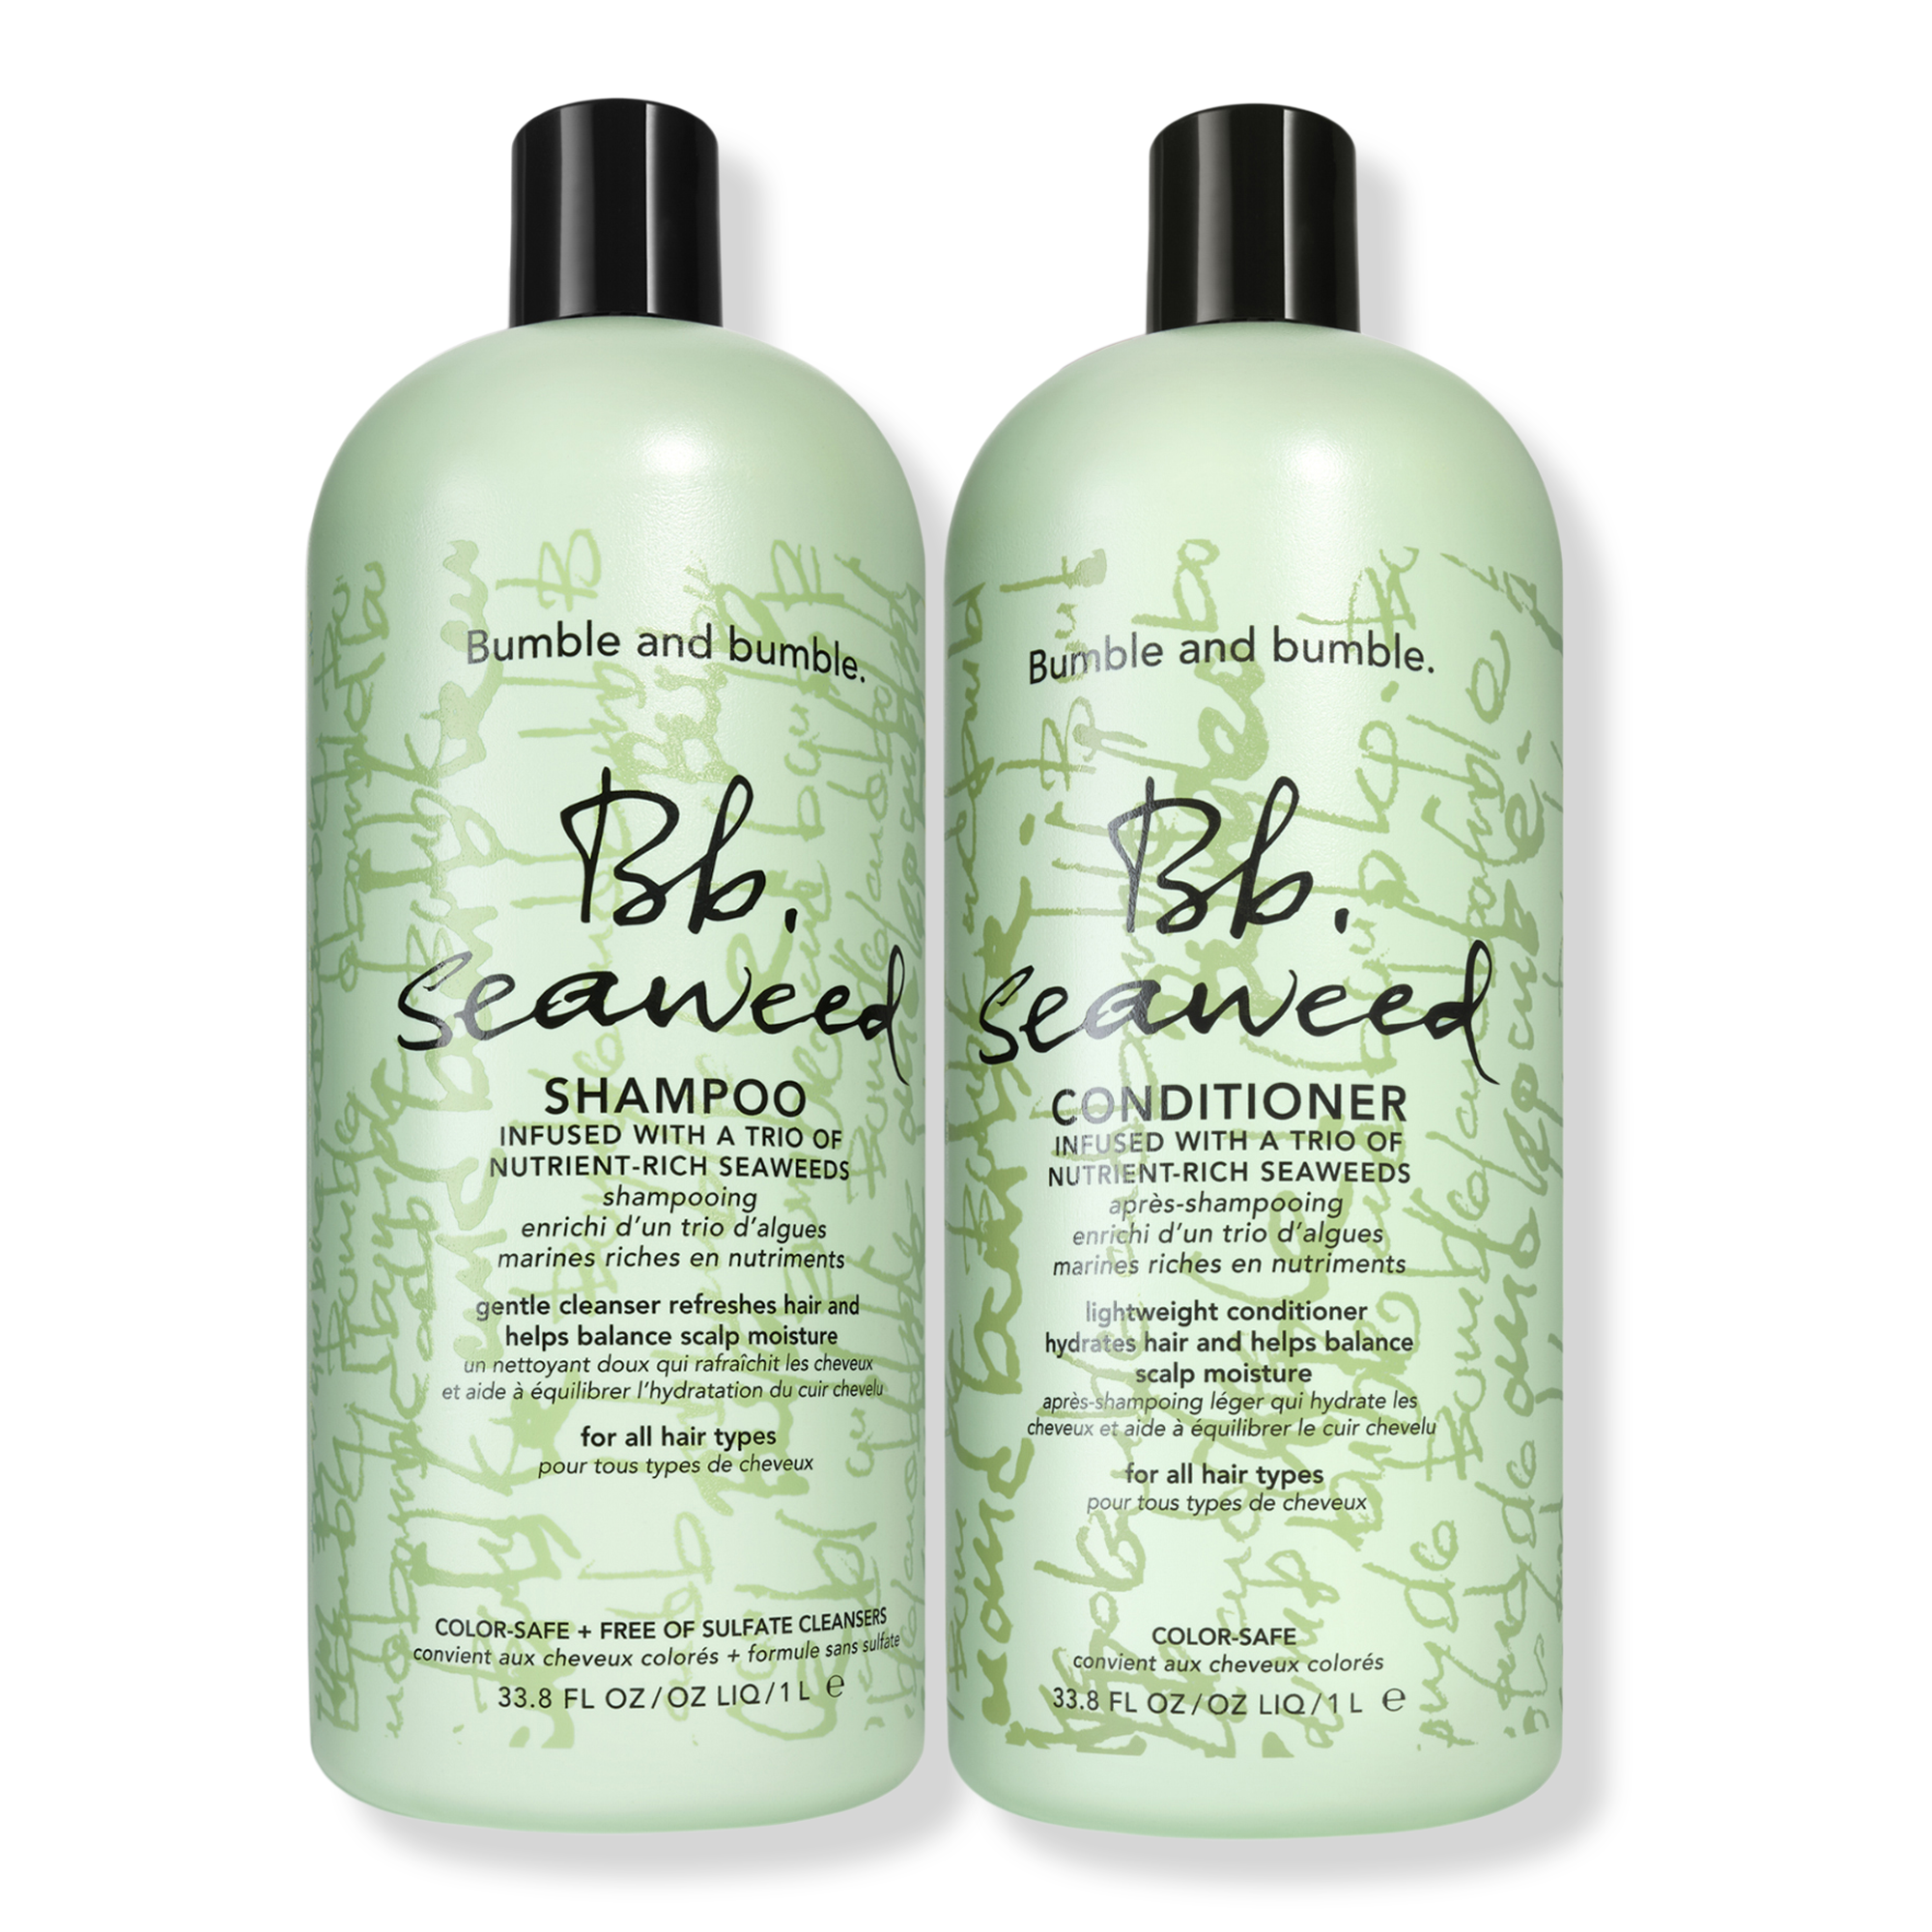 Bumble and bumble Bb.Seaweed Shampoo and Conditioner Liter Duo ($216 Value)